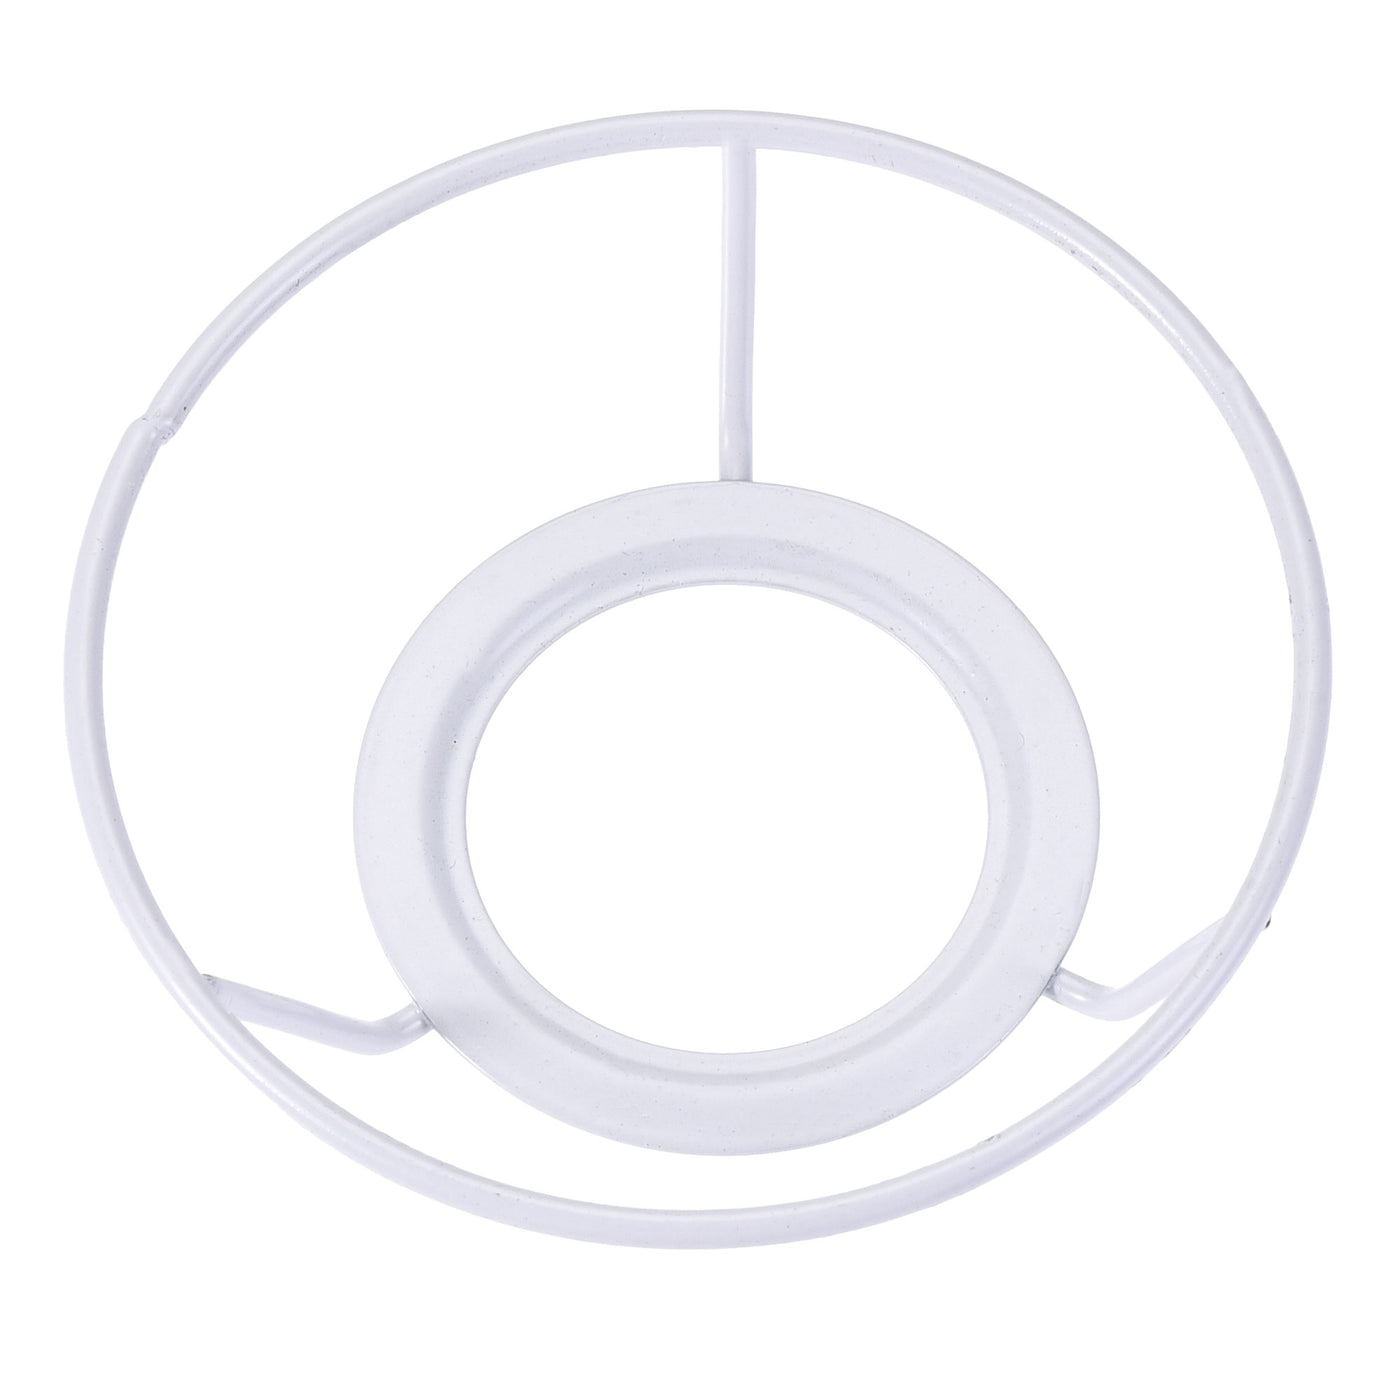 uxcell Uxcell Lamp Shade Ring, 100mm Dia. Lampshade Holder Frame Ring for E26/E27 Lamp Socket, Baked Coating Iron 2 Set